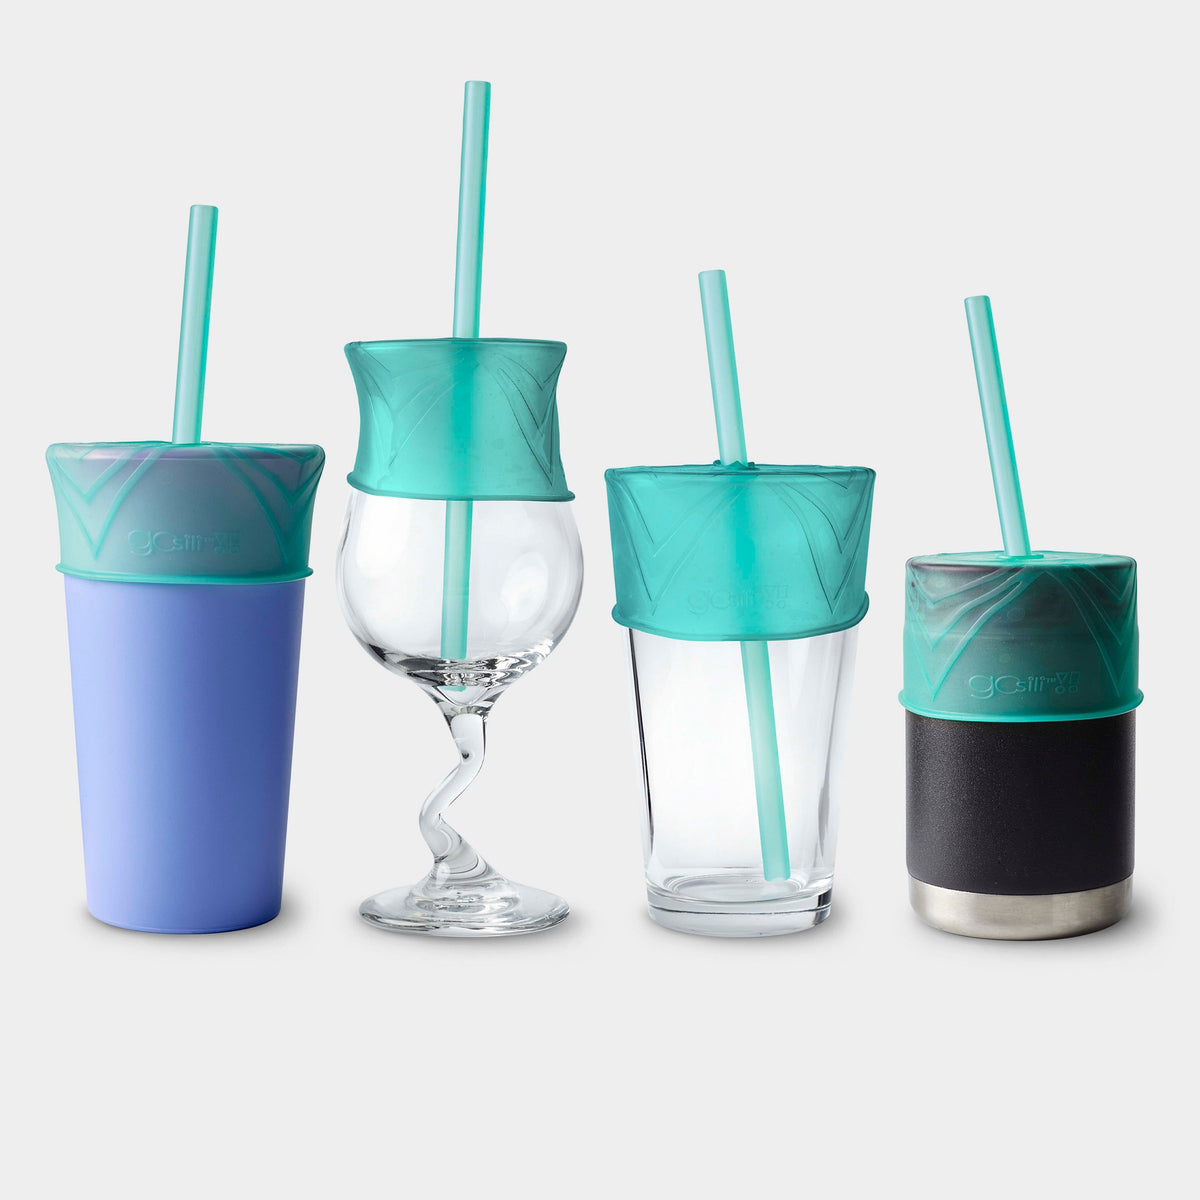 GoSili® Reusable Silicone Drink Protector with an 8 Drinking Straw +